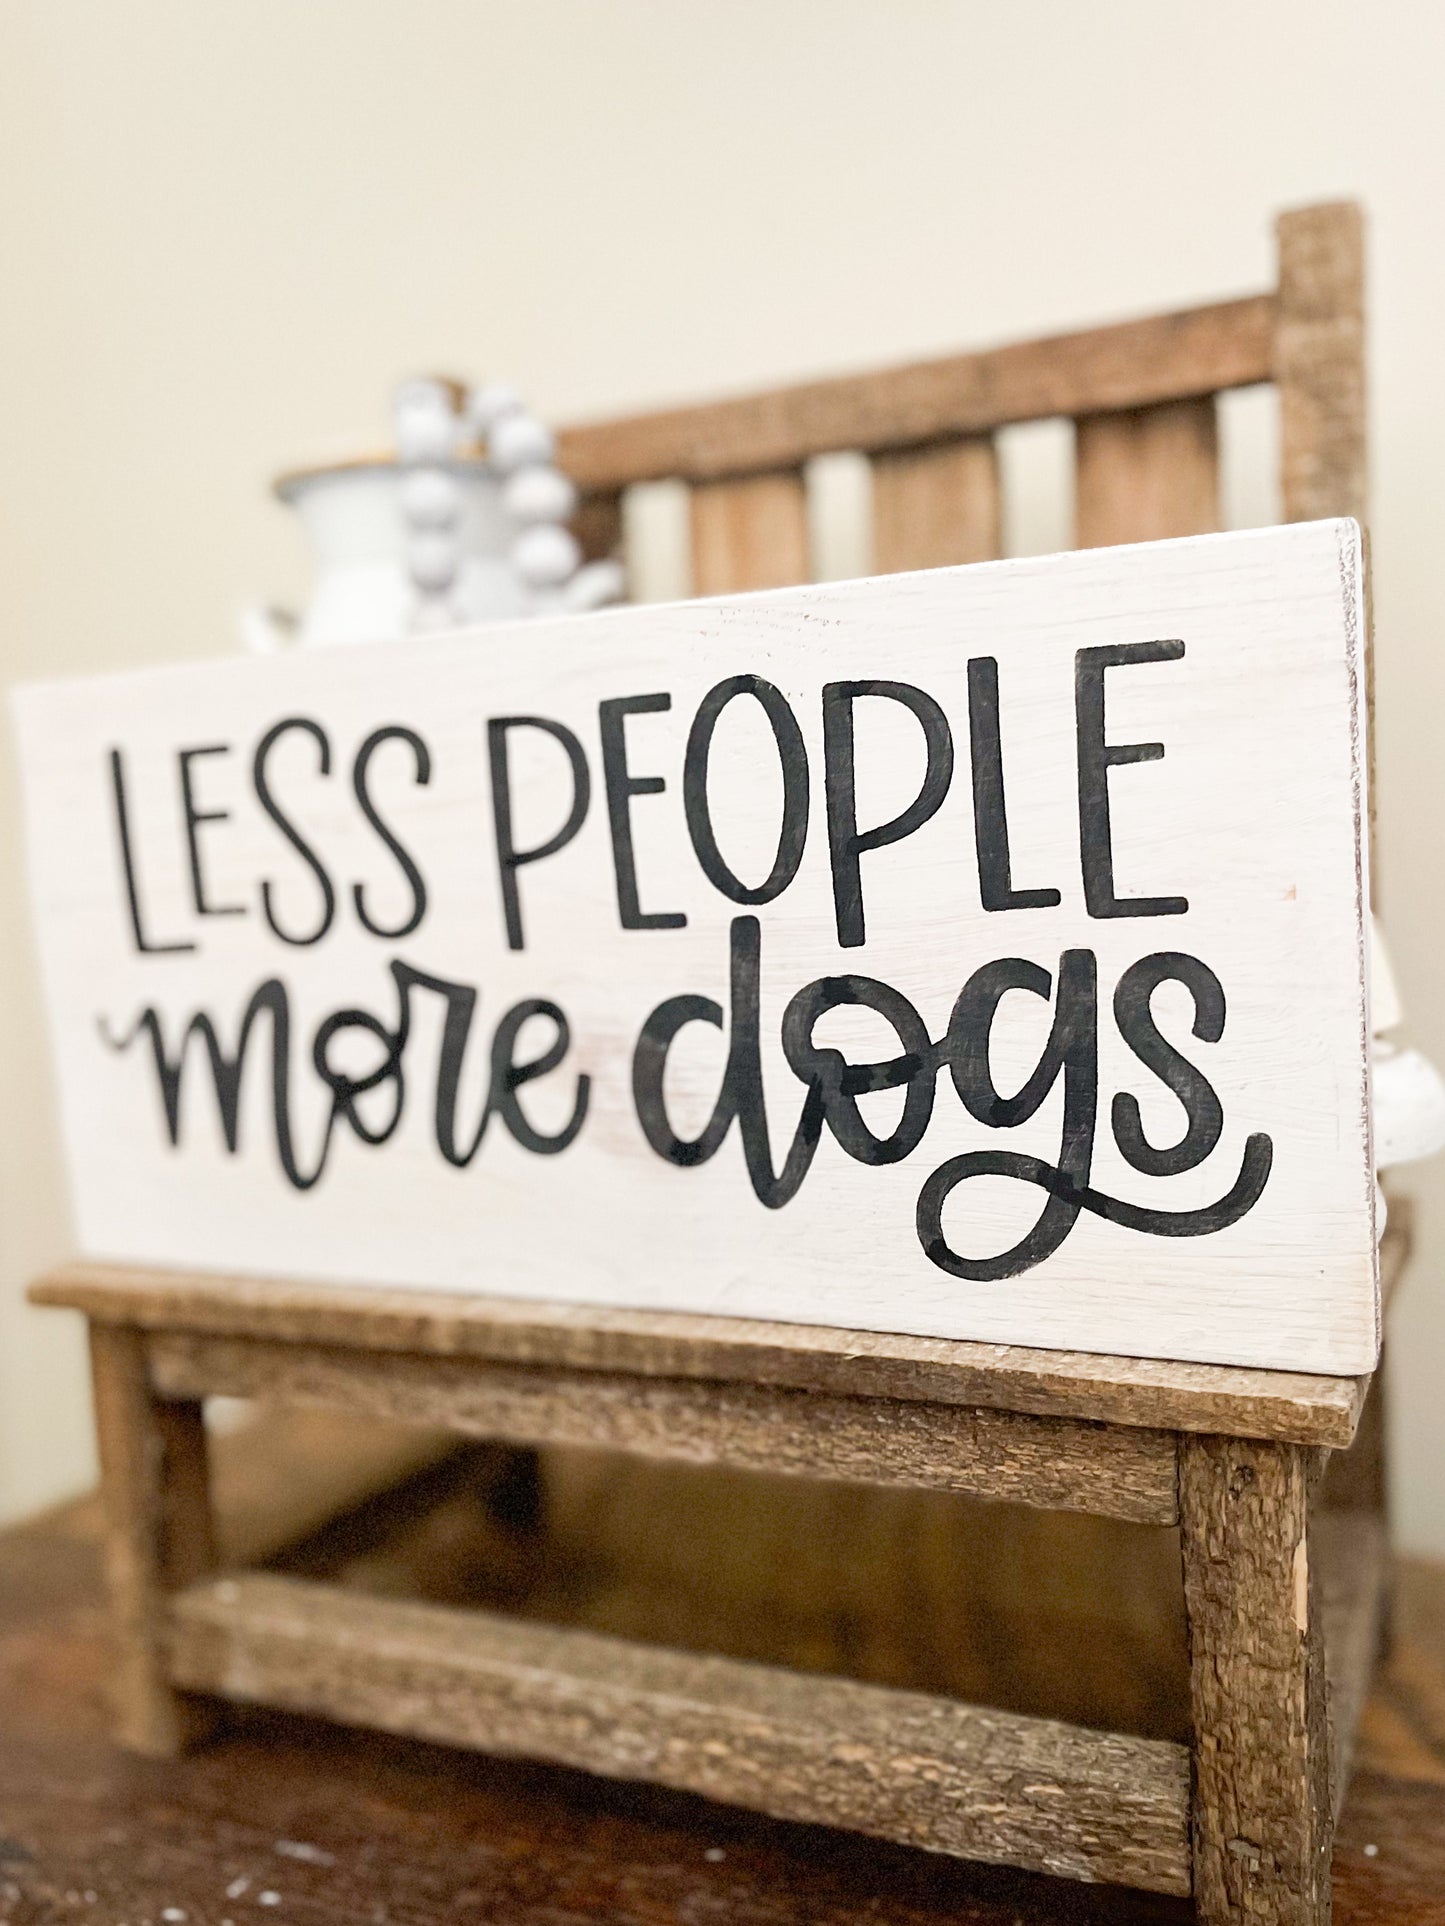 Less people more dogs sign